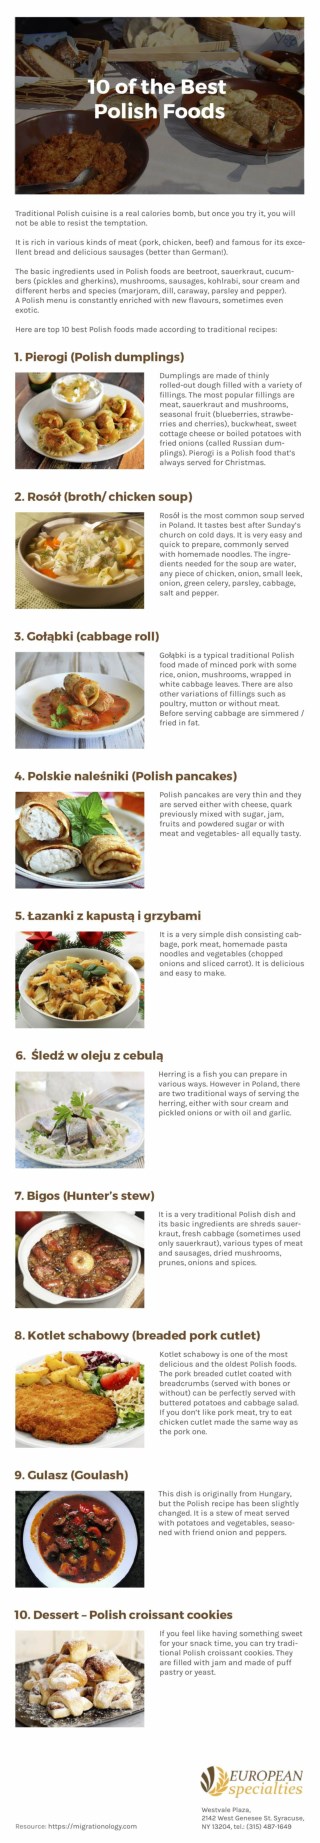 10 of the Best Polish Foods